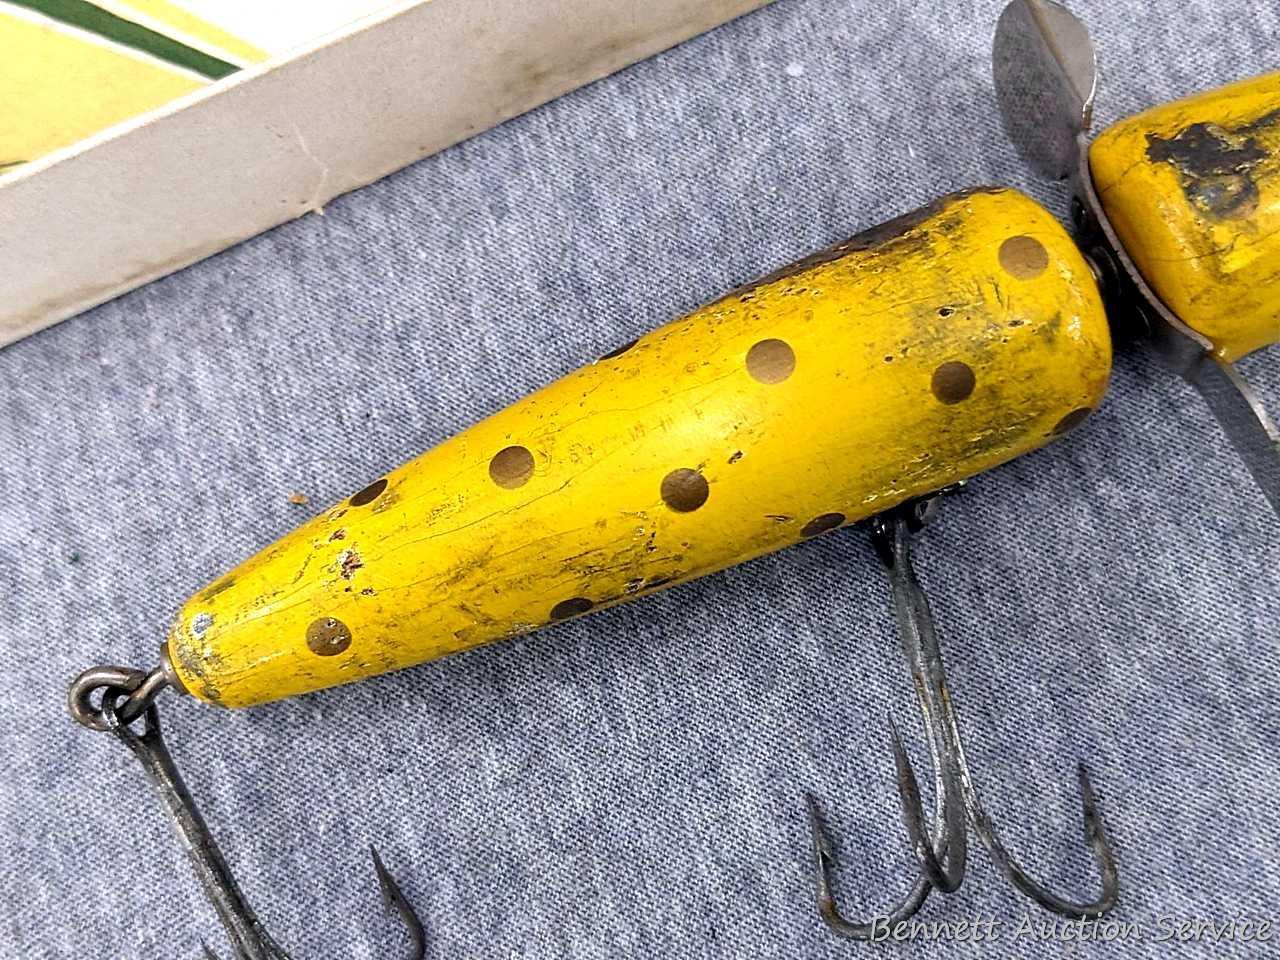 This old wood fishing lure is a Pflueger Globe and it comes with